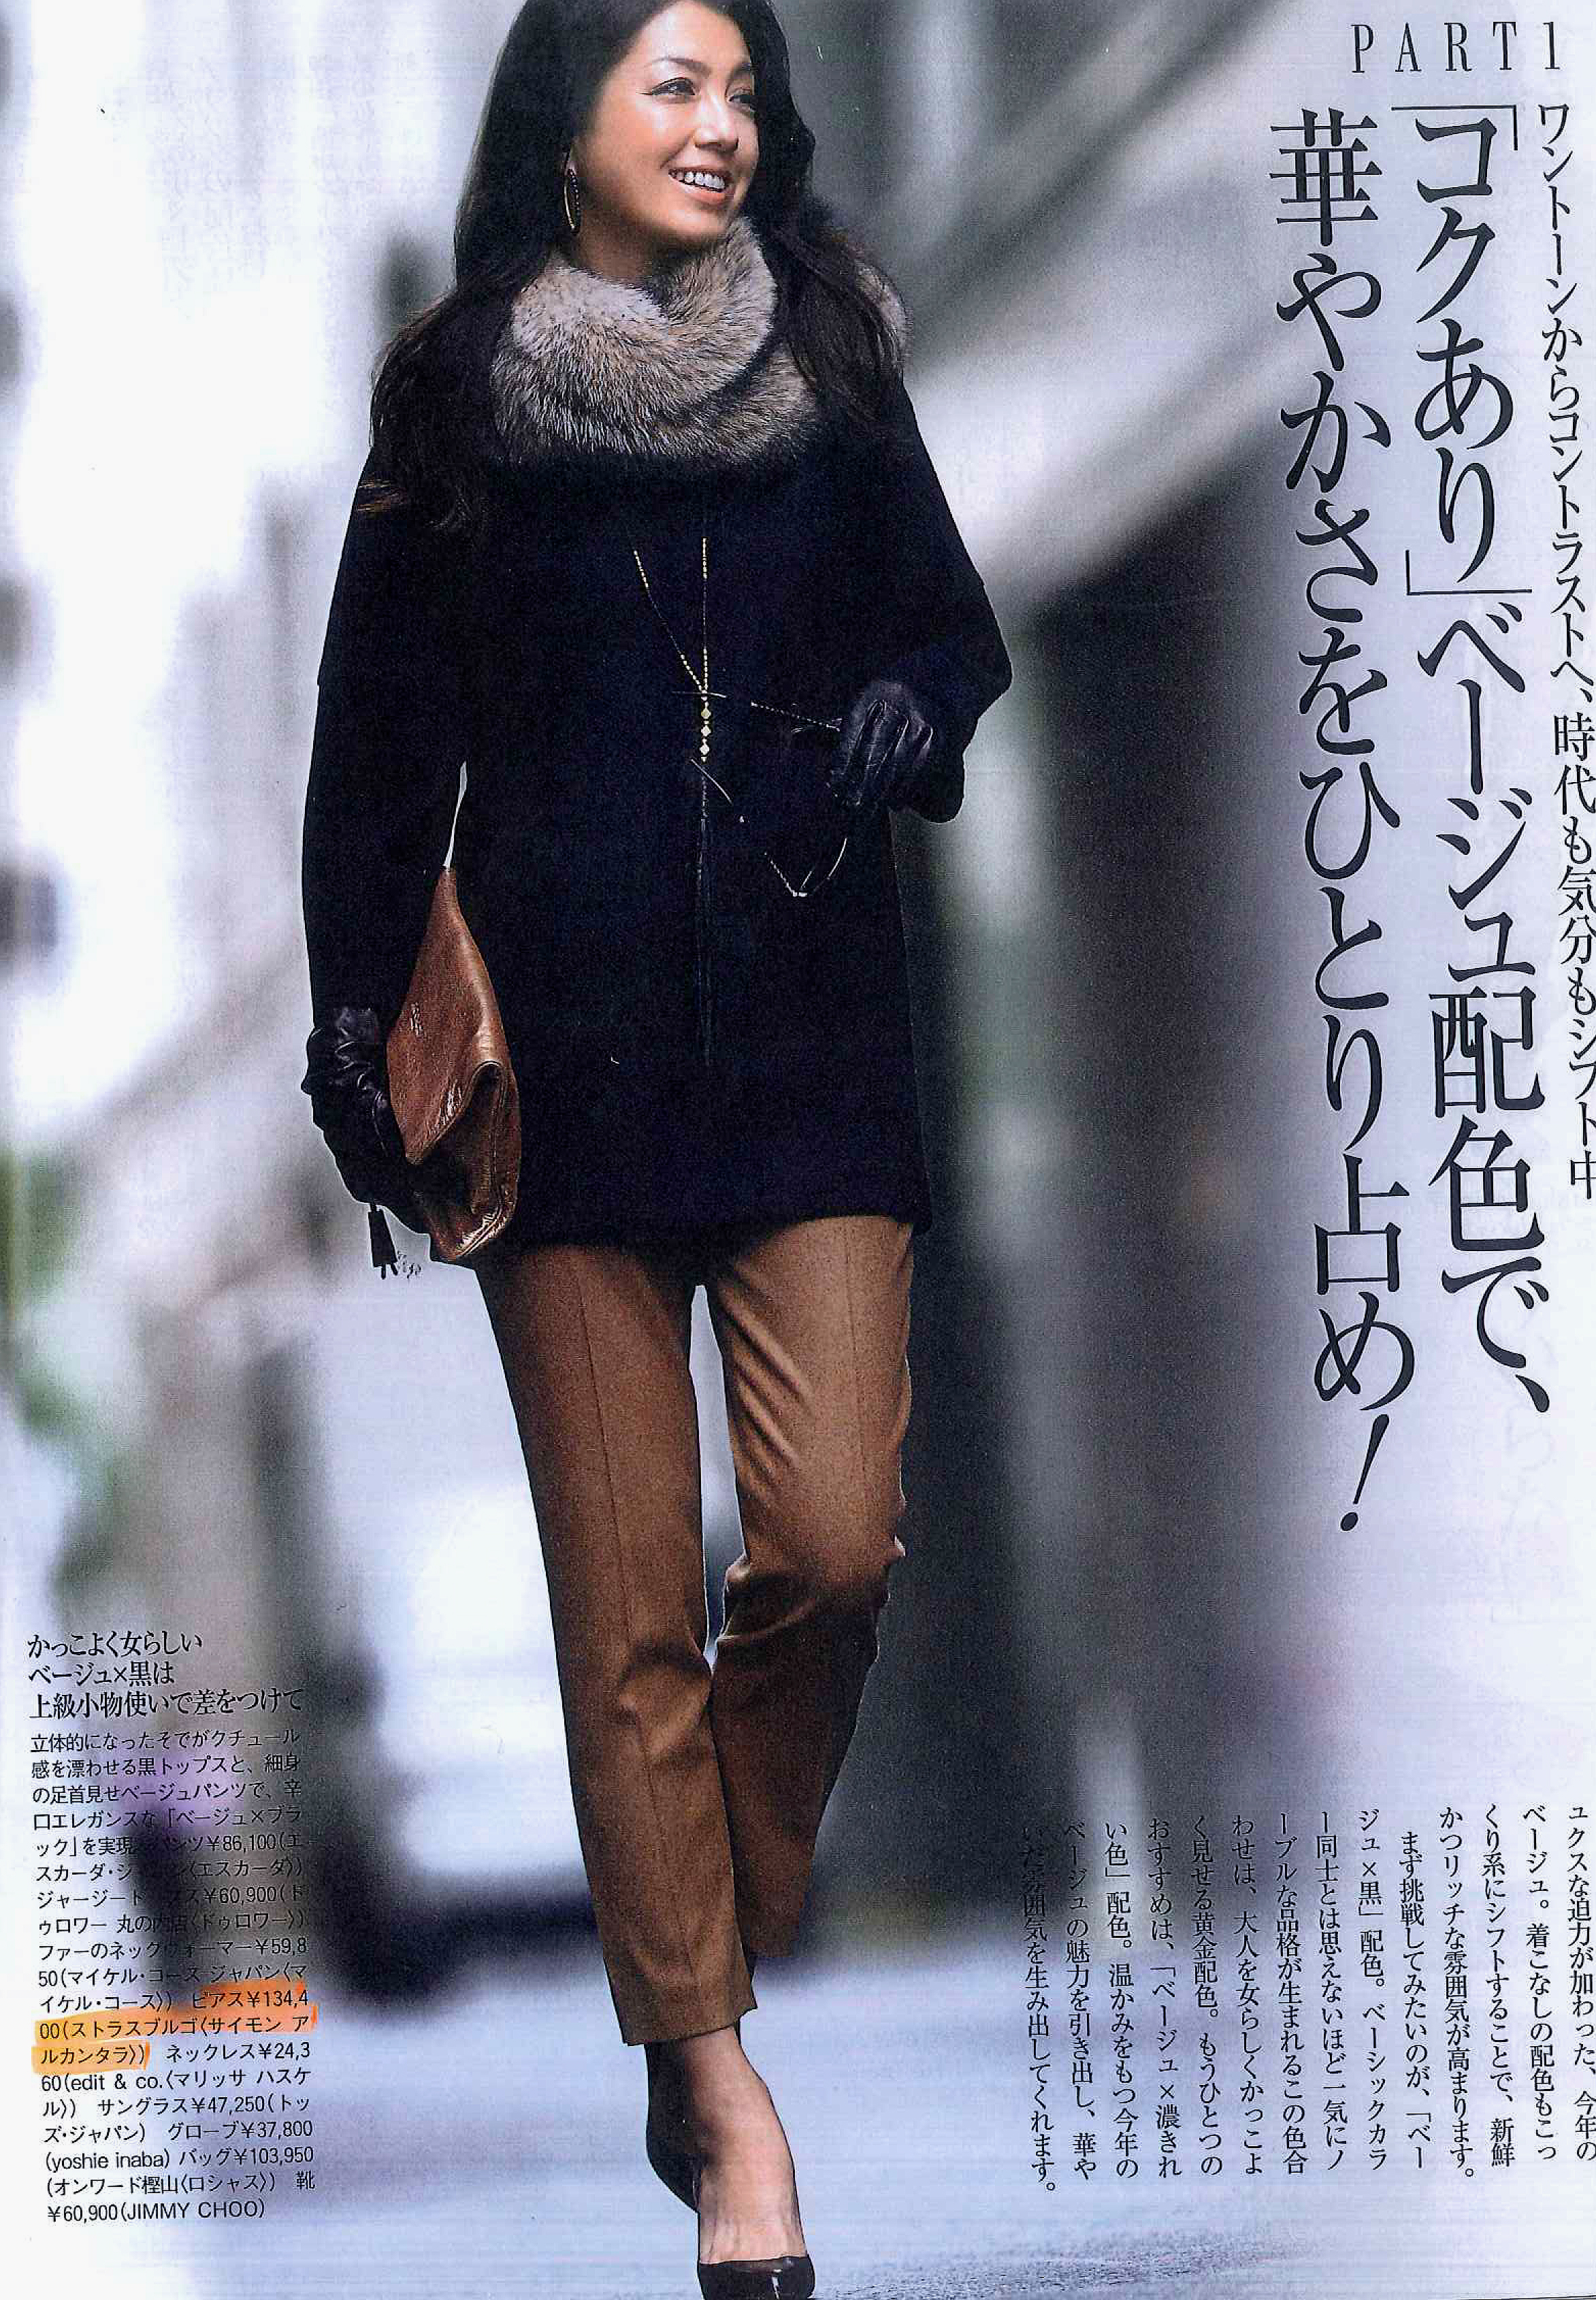 JAPAN- PRECIOUS MAGAZINE DECEMBER 2012 ISSUE. GOLD AND ONYX HAND WOVEN HOOPS.